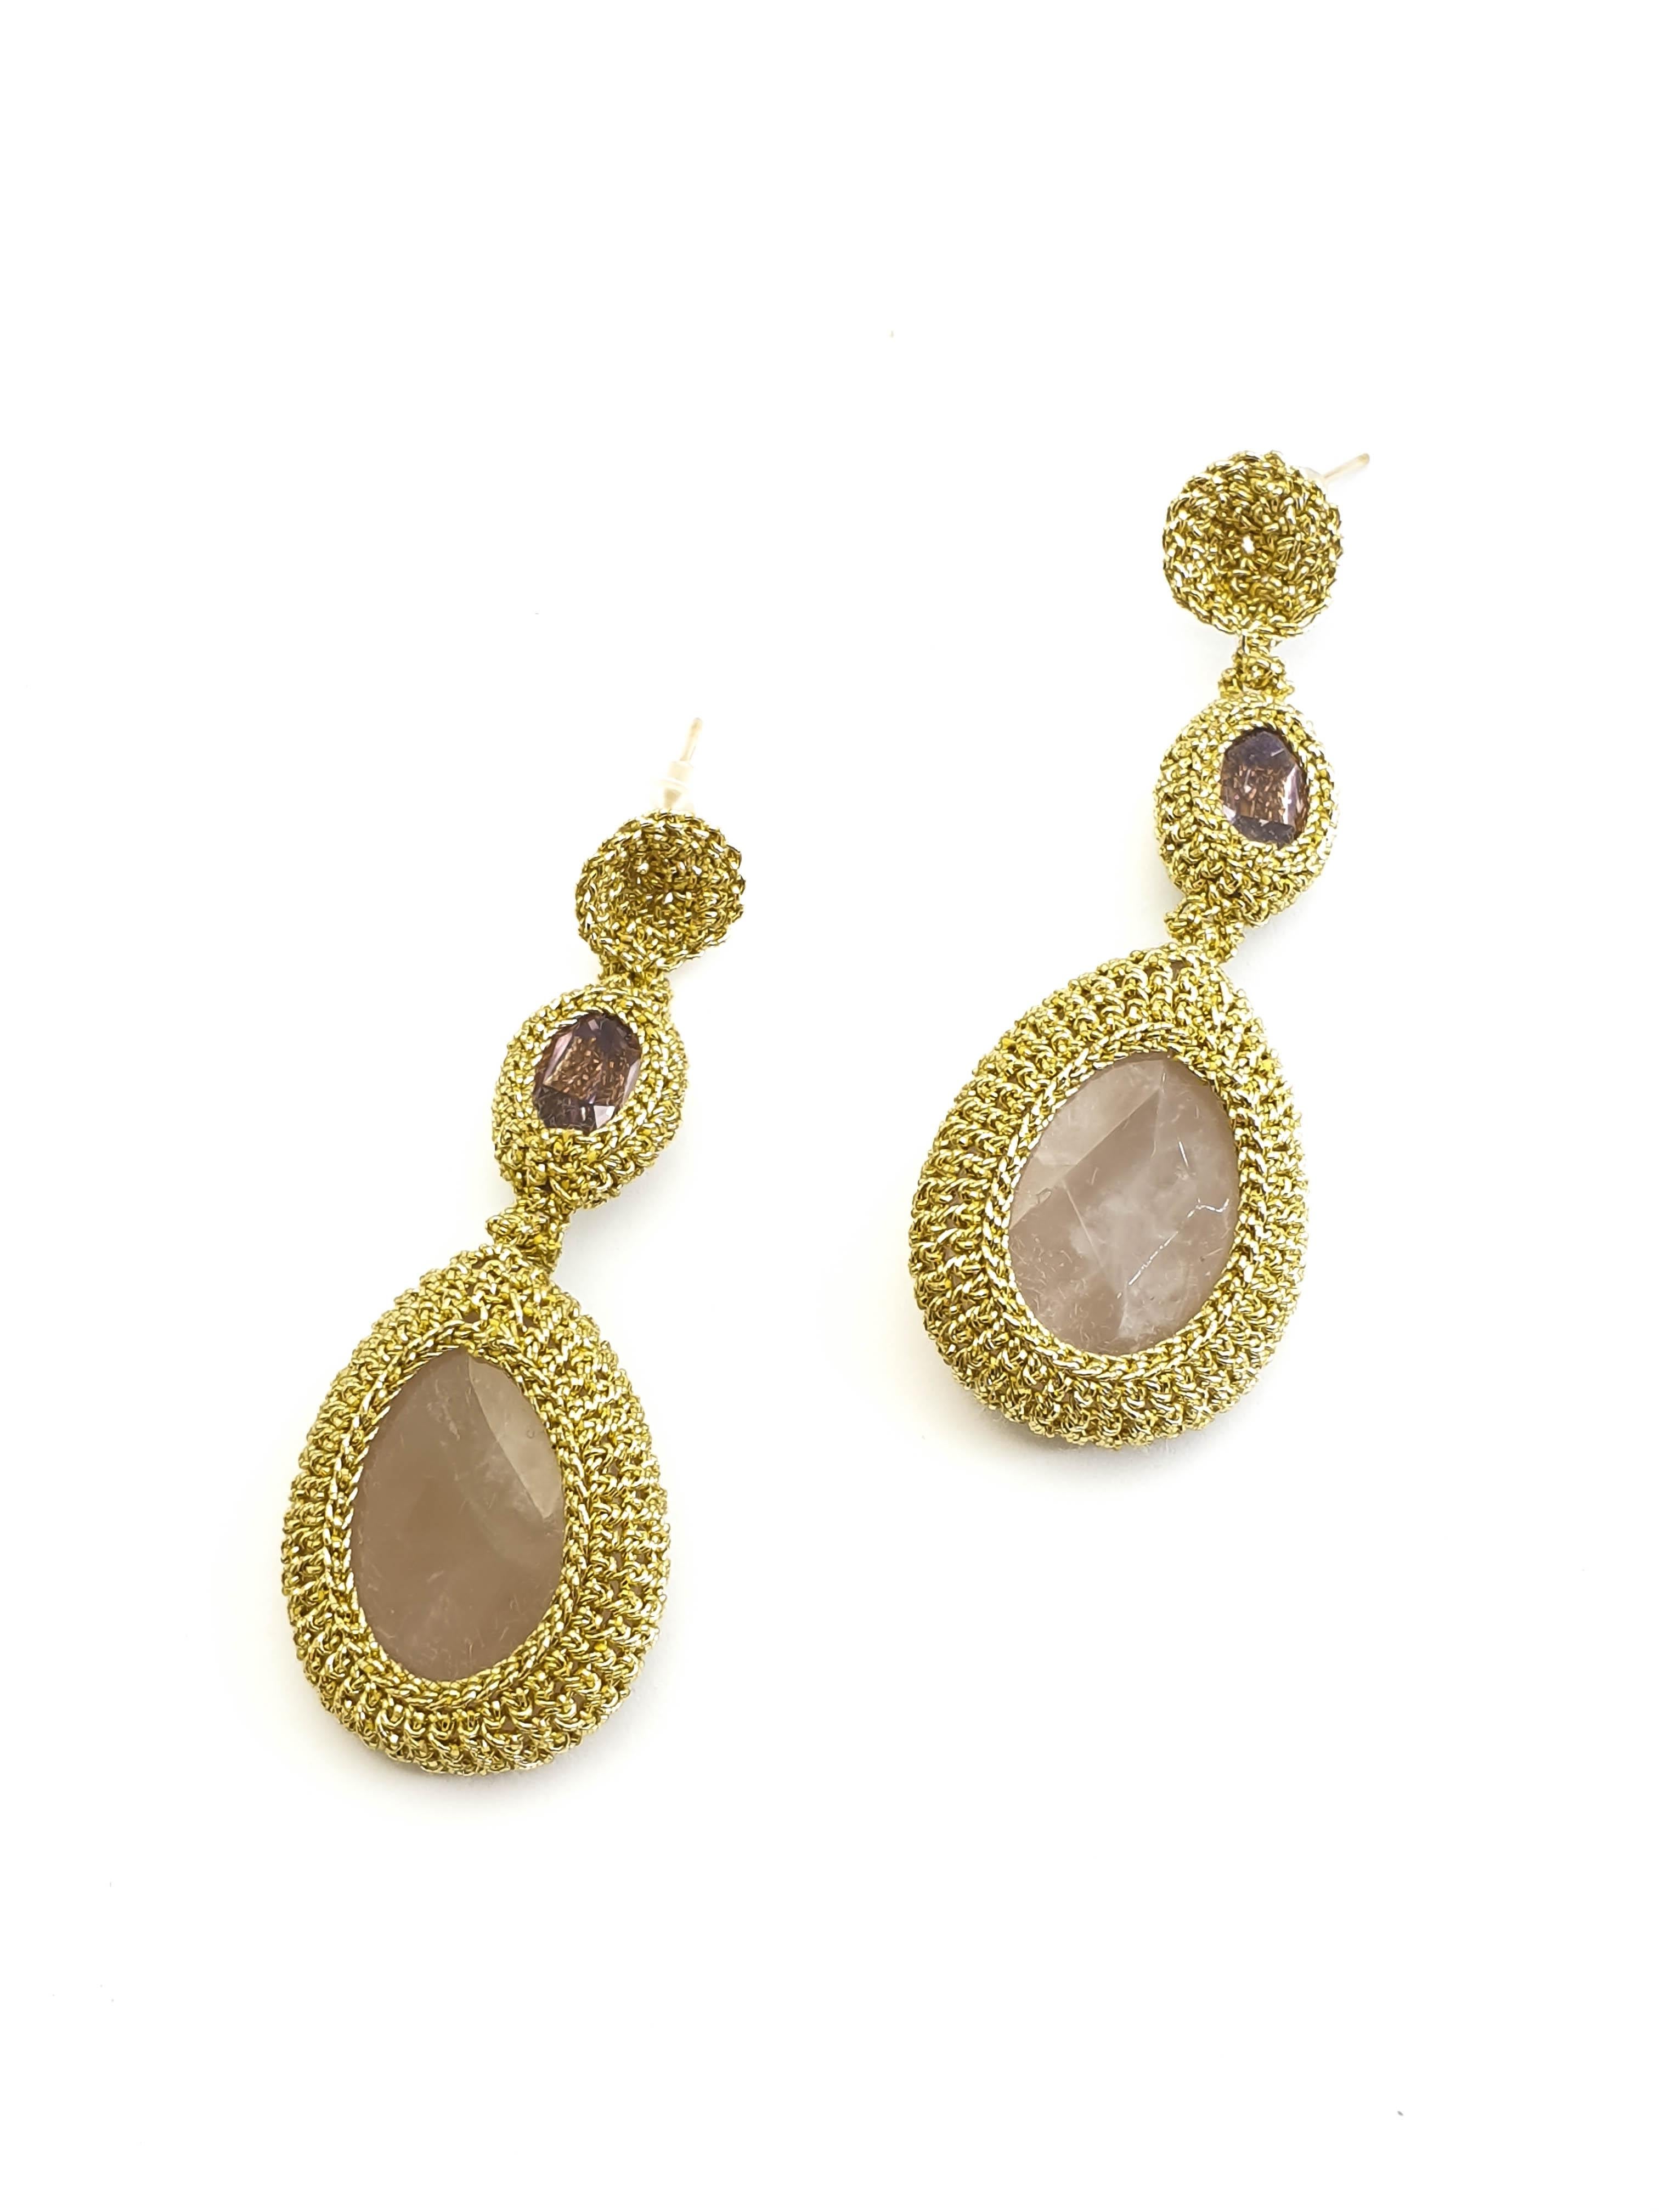 Gold Color Crochet Thread Statement Bold Earrings Rose Quartz Swarovski Crystals In New Condition For Sale In Kfar Saba, IL